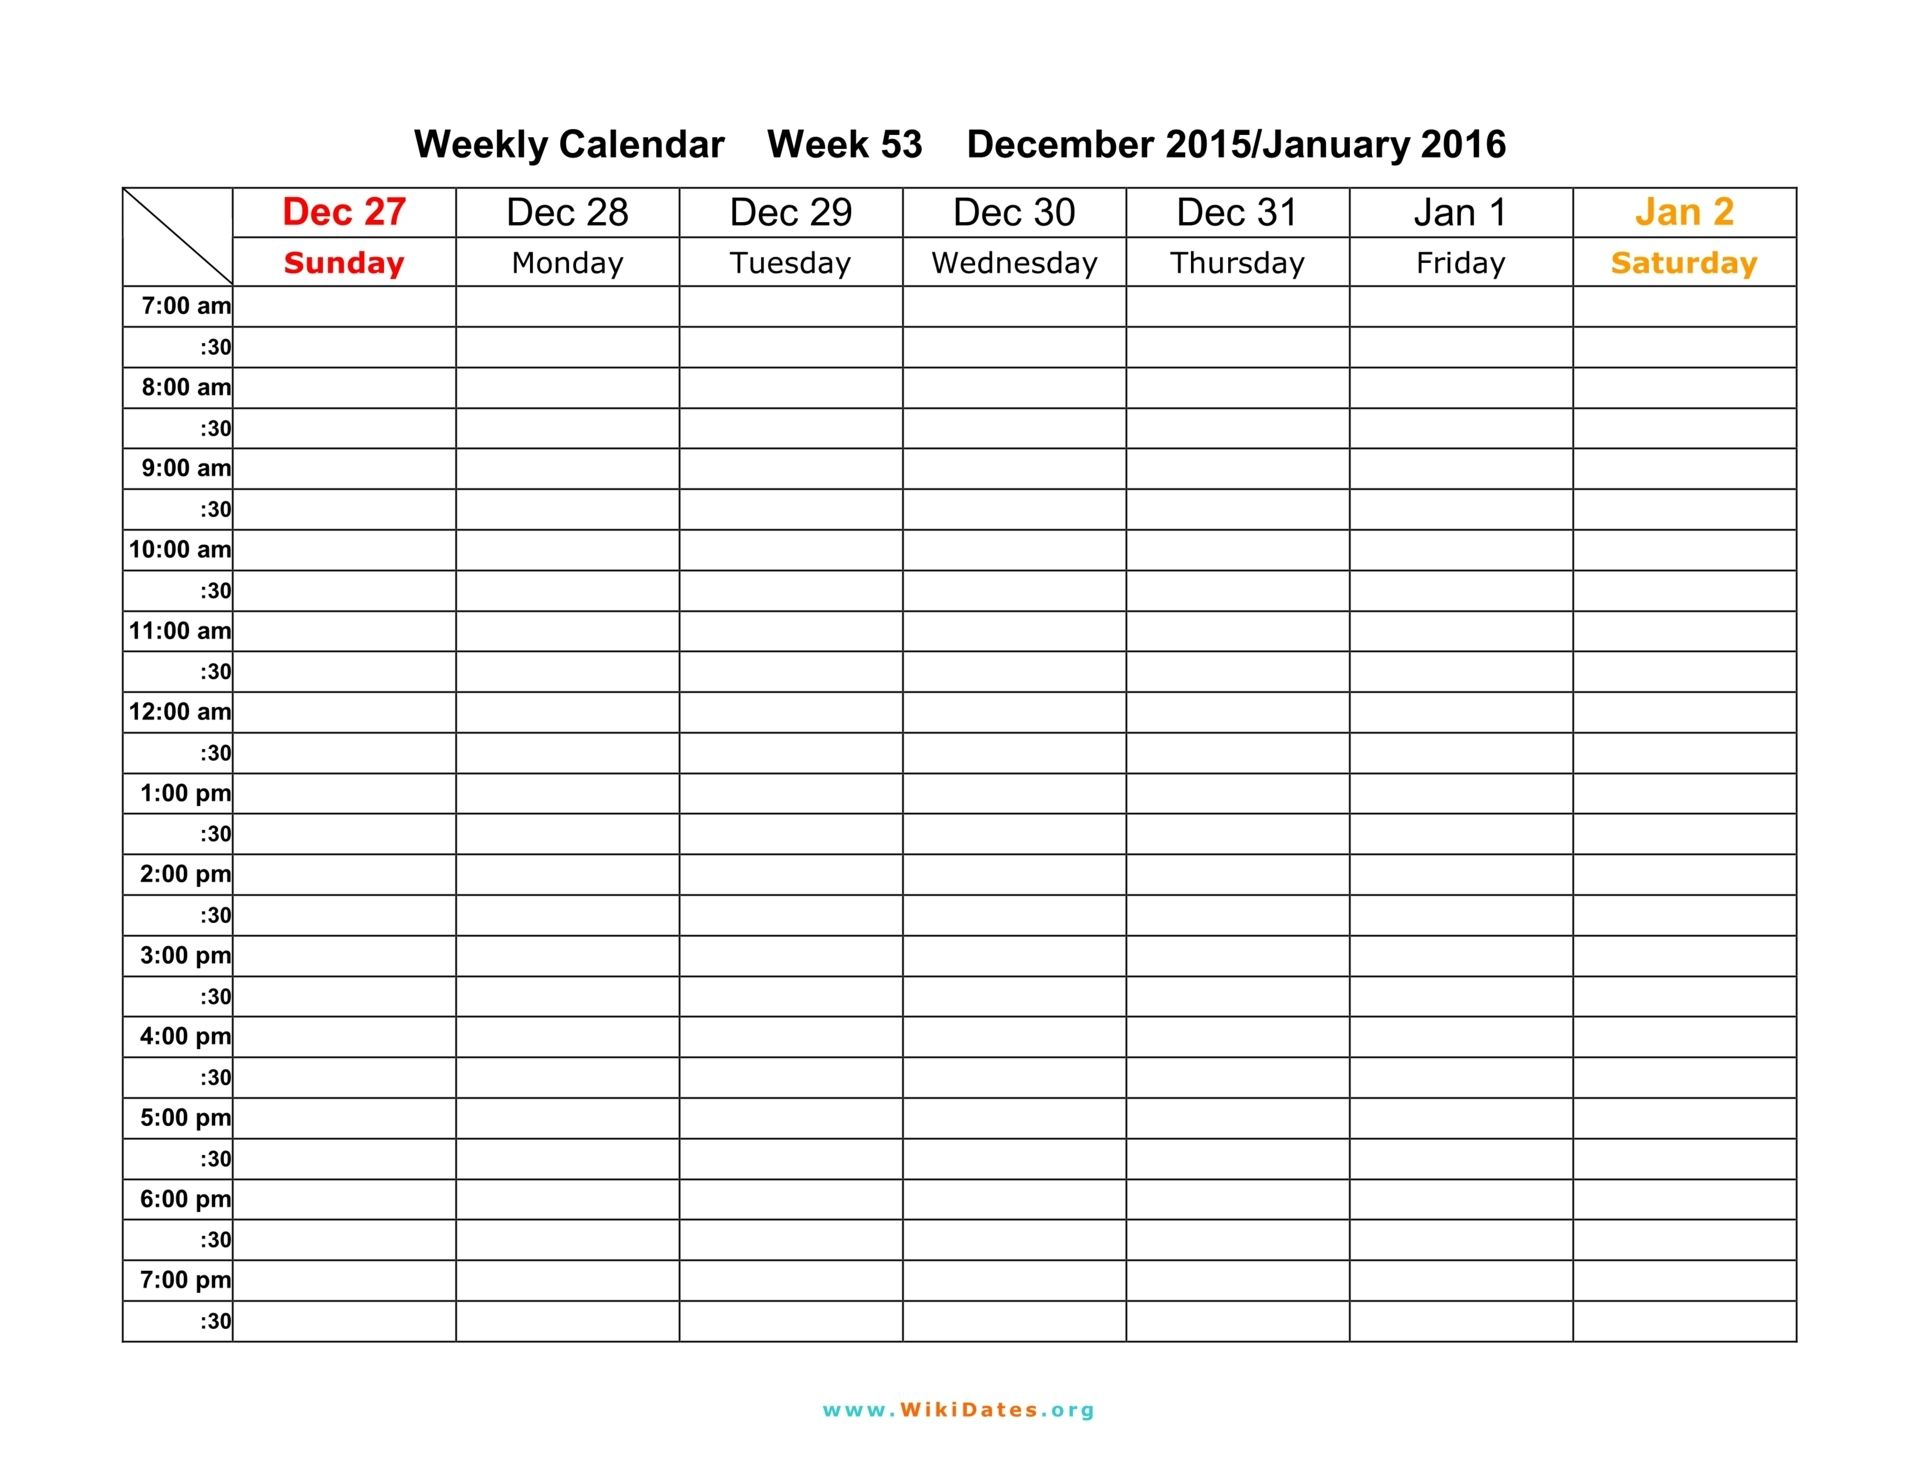 Daily Calendar Template 30 Minute Increments Calendar for Planning